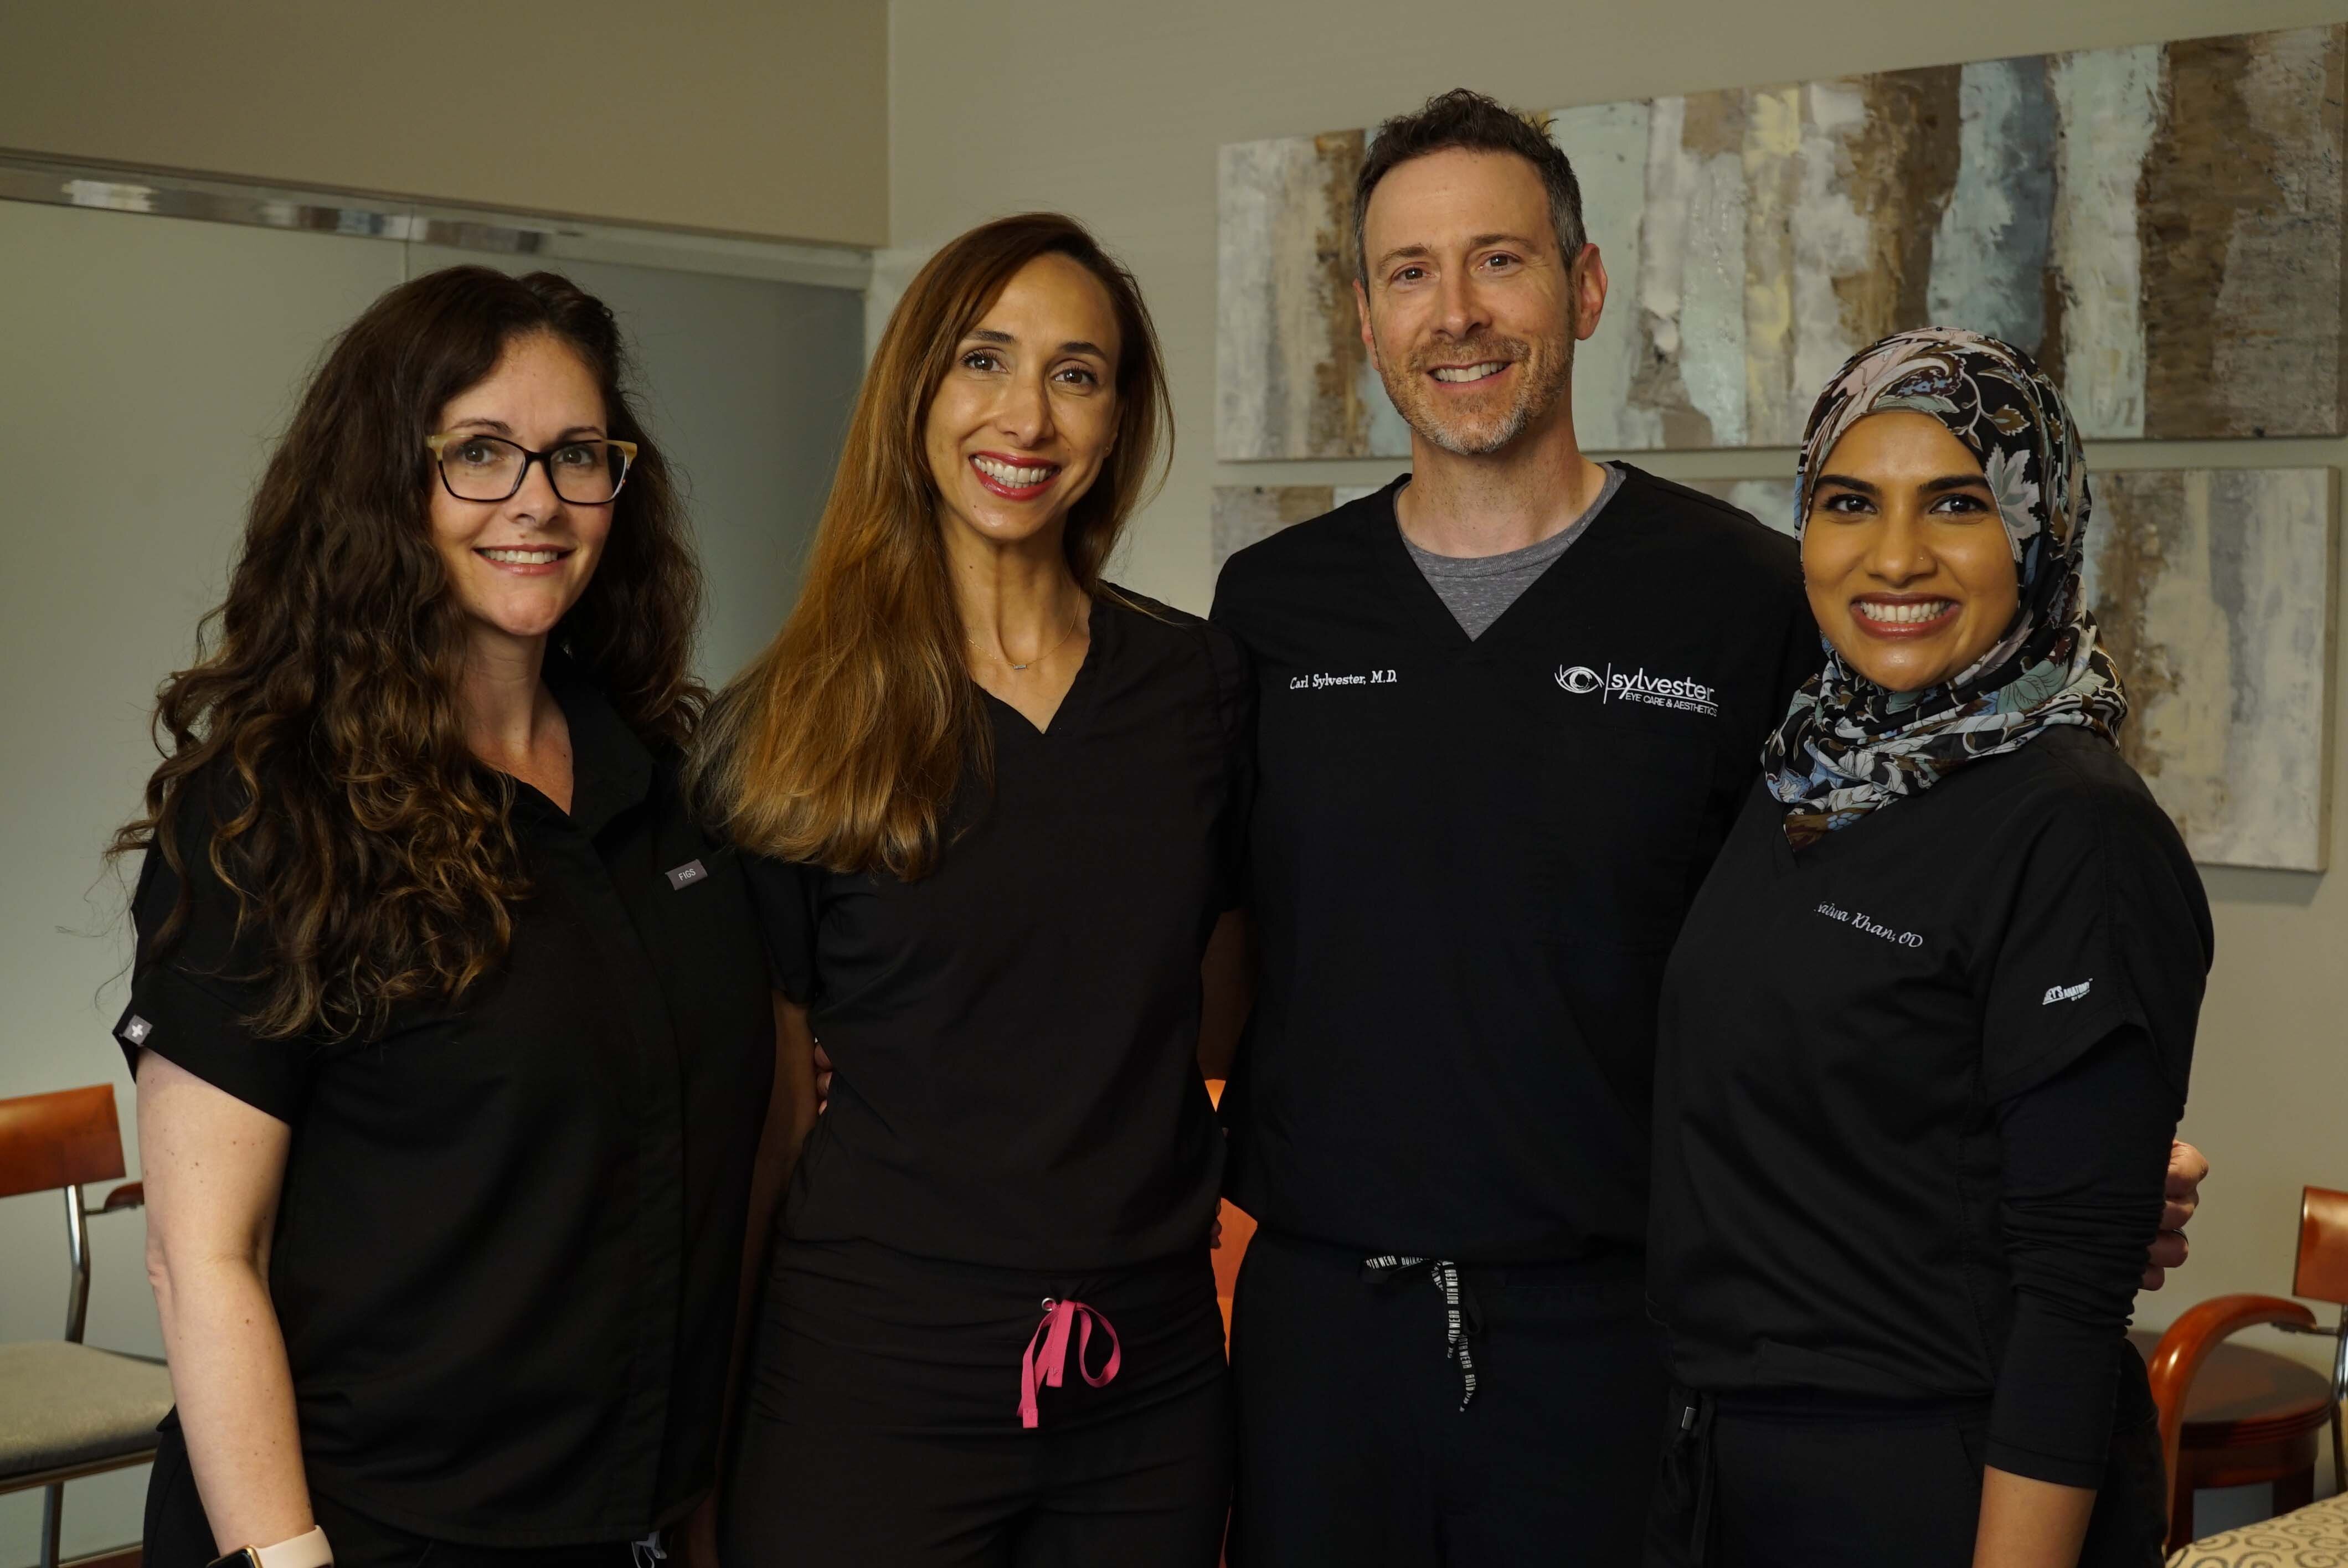 Meet the doctors at Sylvester Eye Care